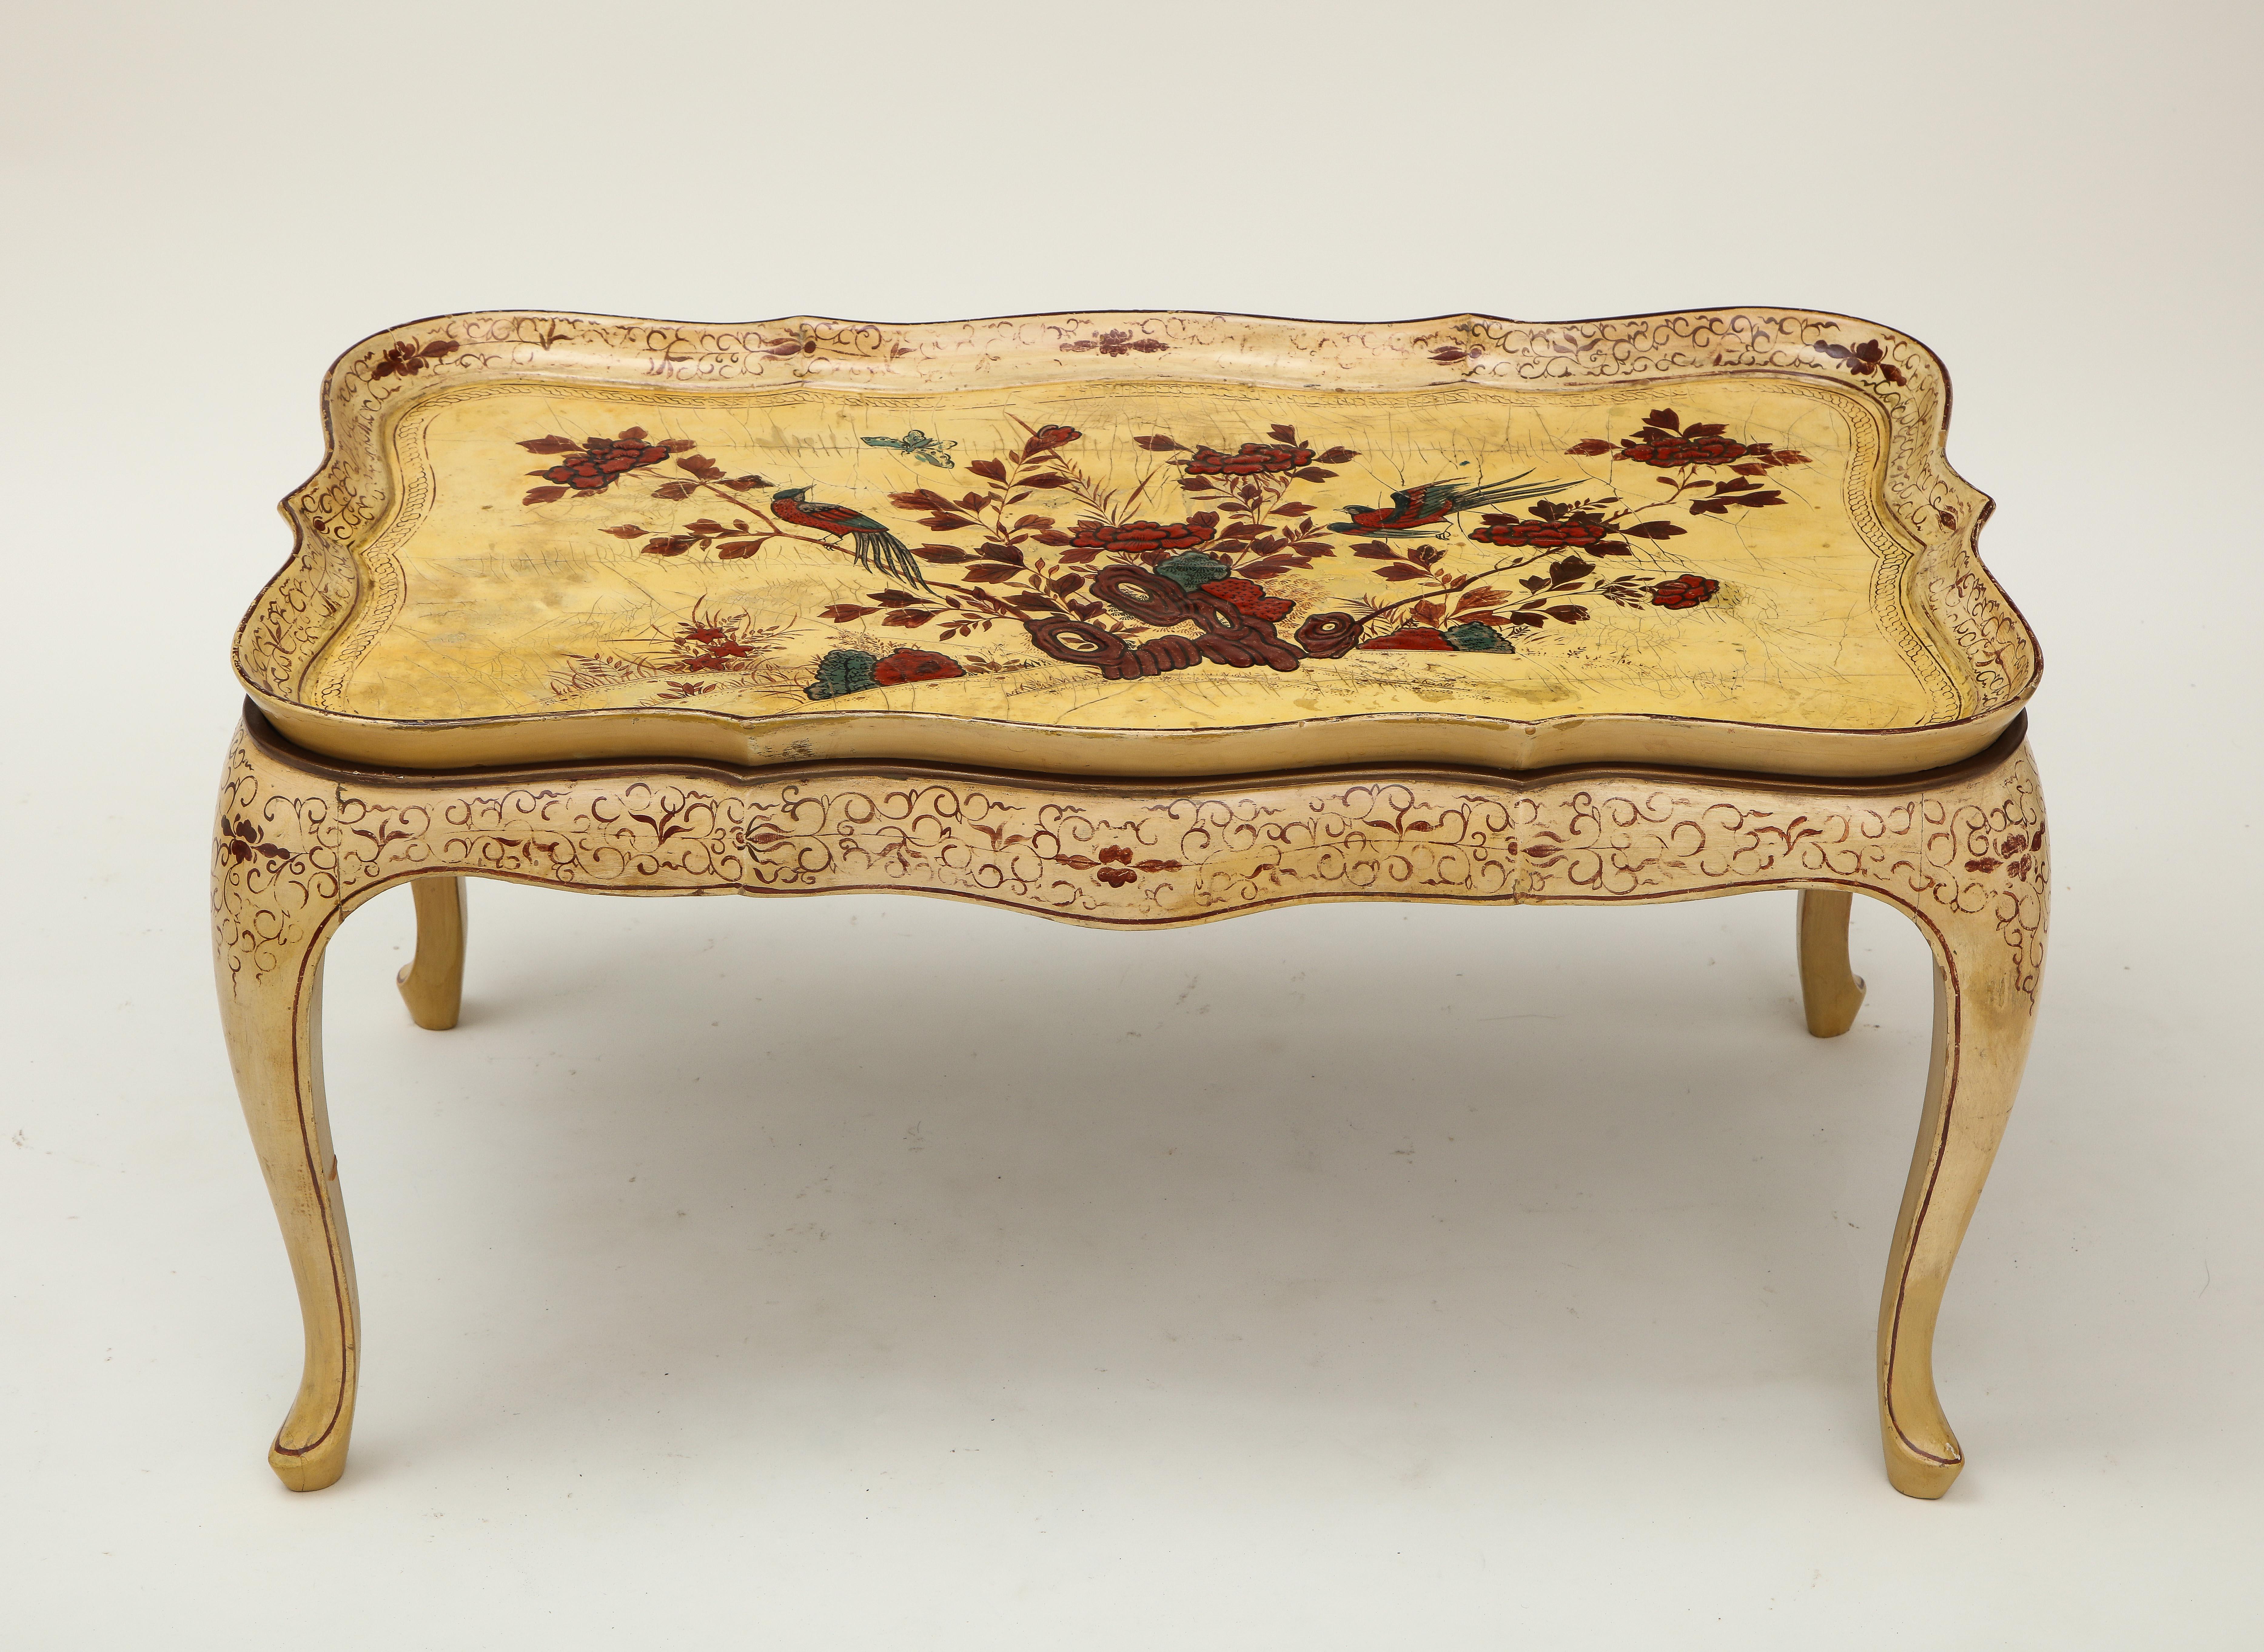 Decorated with floral blossoms and birds in crimson, blue, and gilt on an ivory ground; the shaped removable tray top on a conforming base with cabriole legs ending in pad feet.